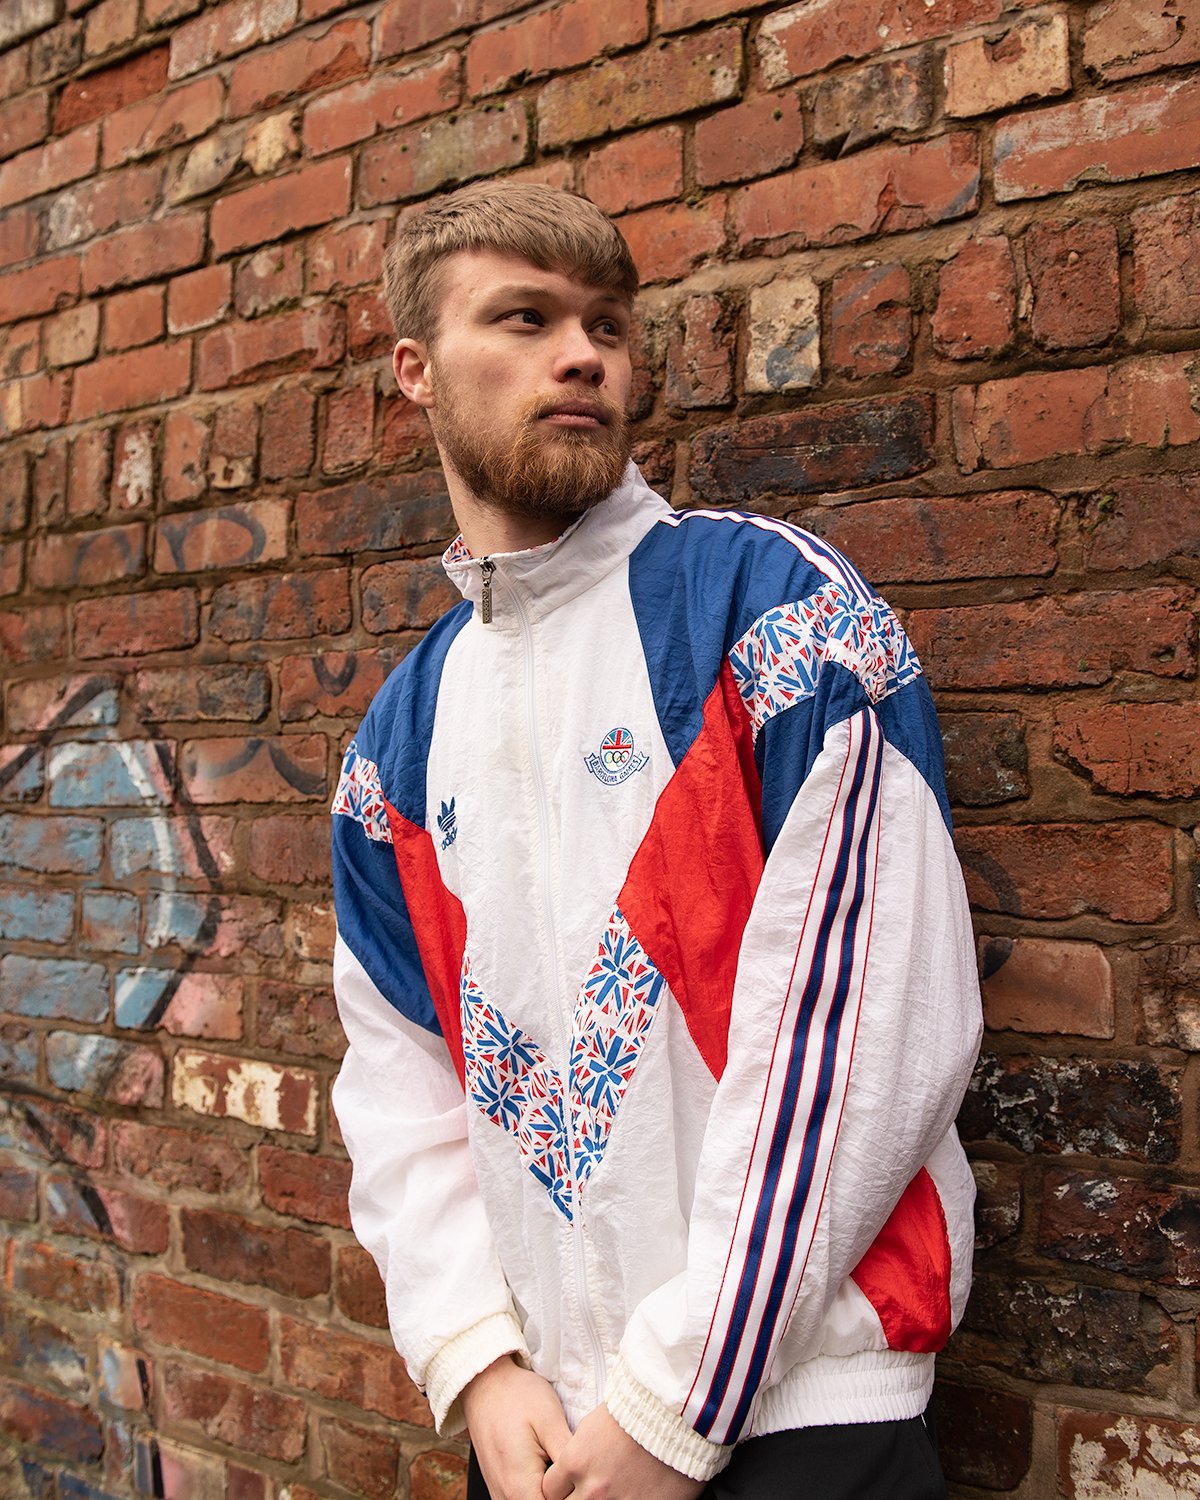 Football Shirts on Twitter: "Great Britain Olympics Jacket by Adidas Stunning nineties jacket featuring the Trefoil logo 🇬🇧 https://t.co/UaFcAwO226" / Twitter